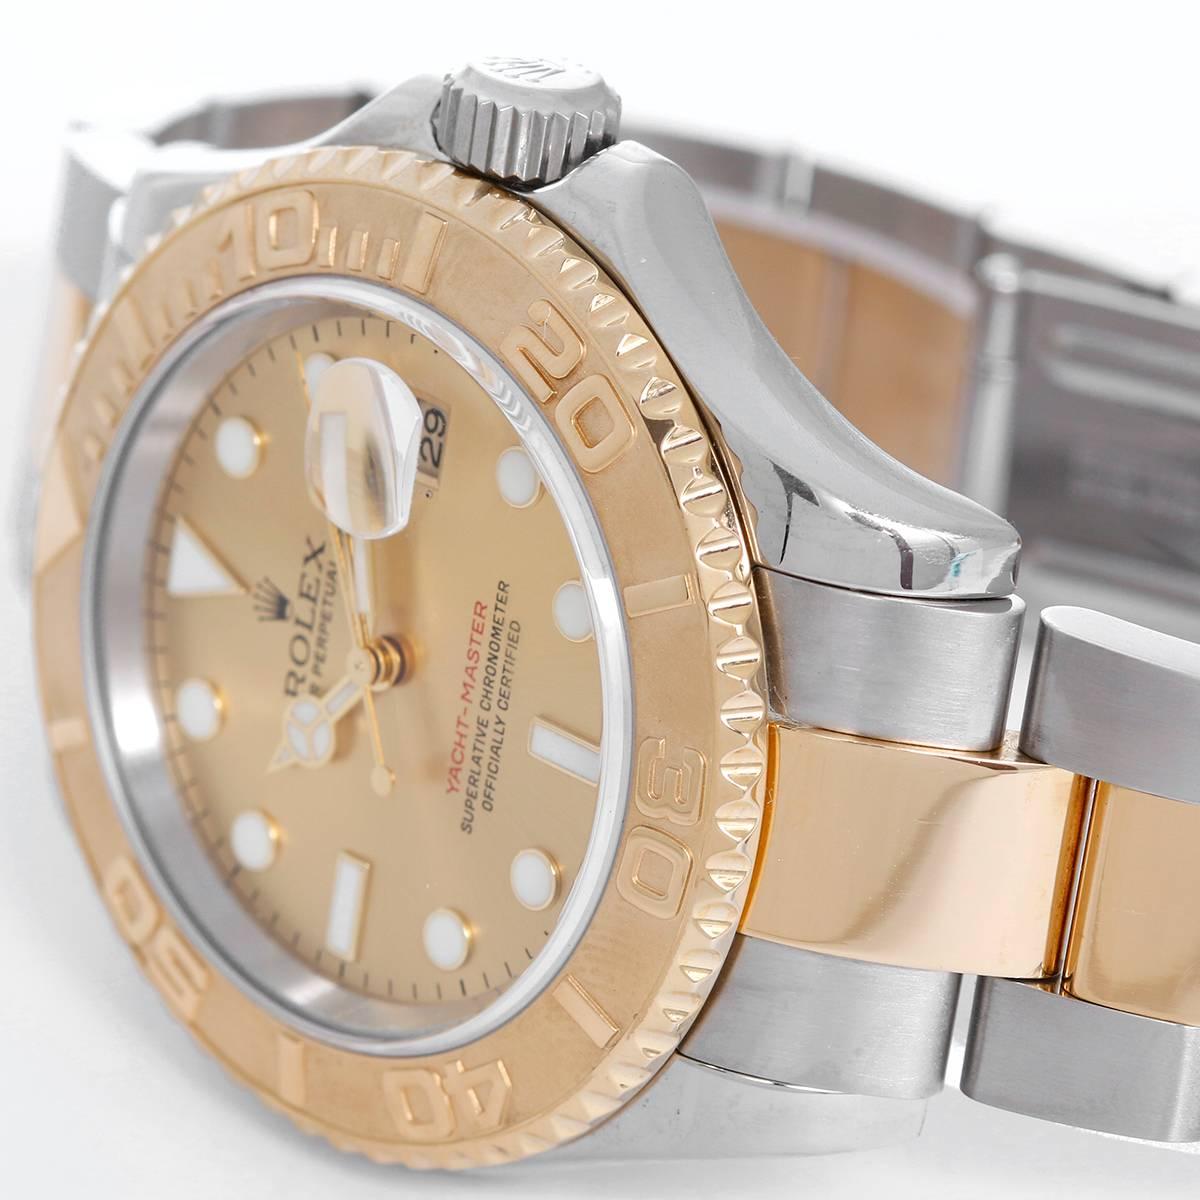 Rolex Yacht-Master Steel & Gold Men's 2-Tone Sport Watch 16623 -  Automatic winding, 31 jewels, Quickset, sapphire crystal. Stainless steel case with 18k yellow gold bezel  (40mm diameter). Champagne dial with luminous markers. Stainless steel and